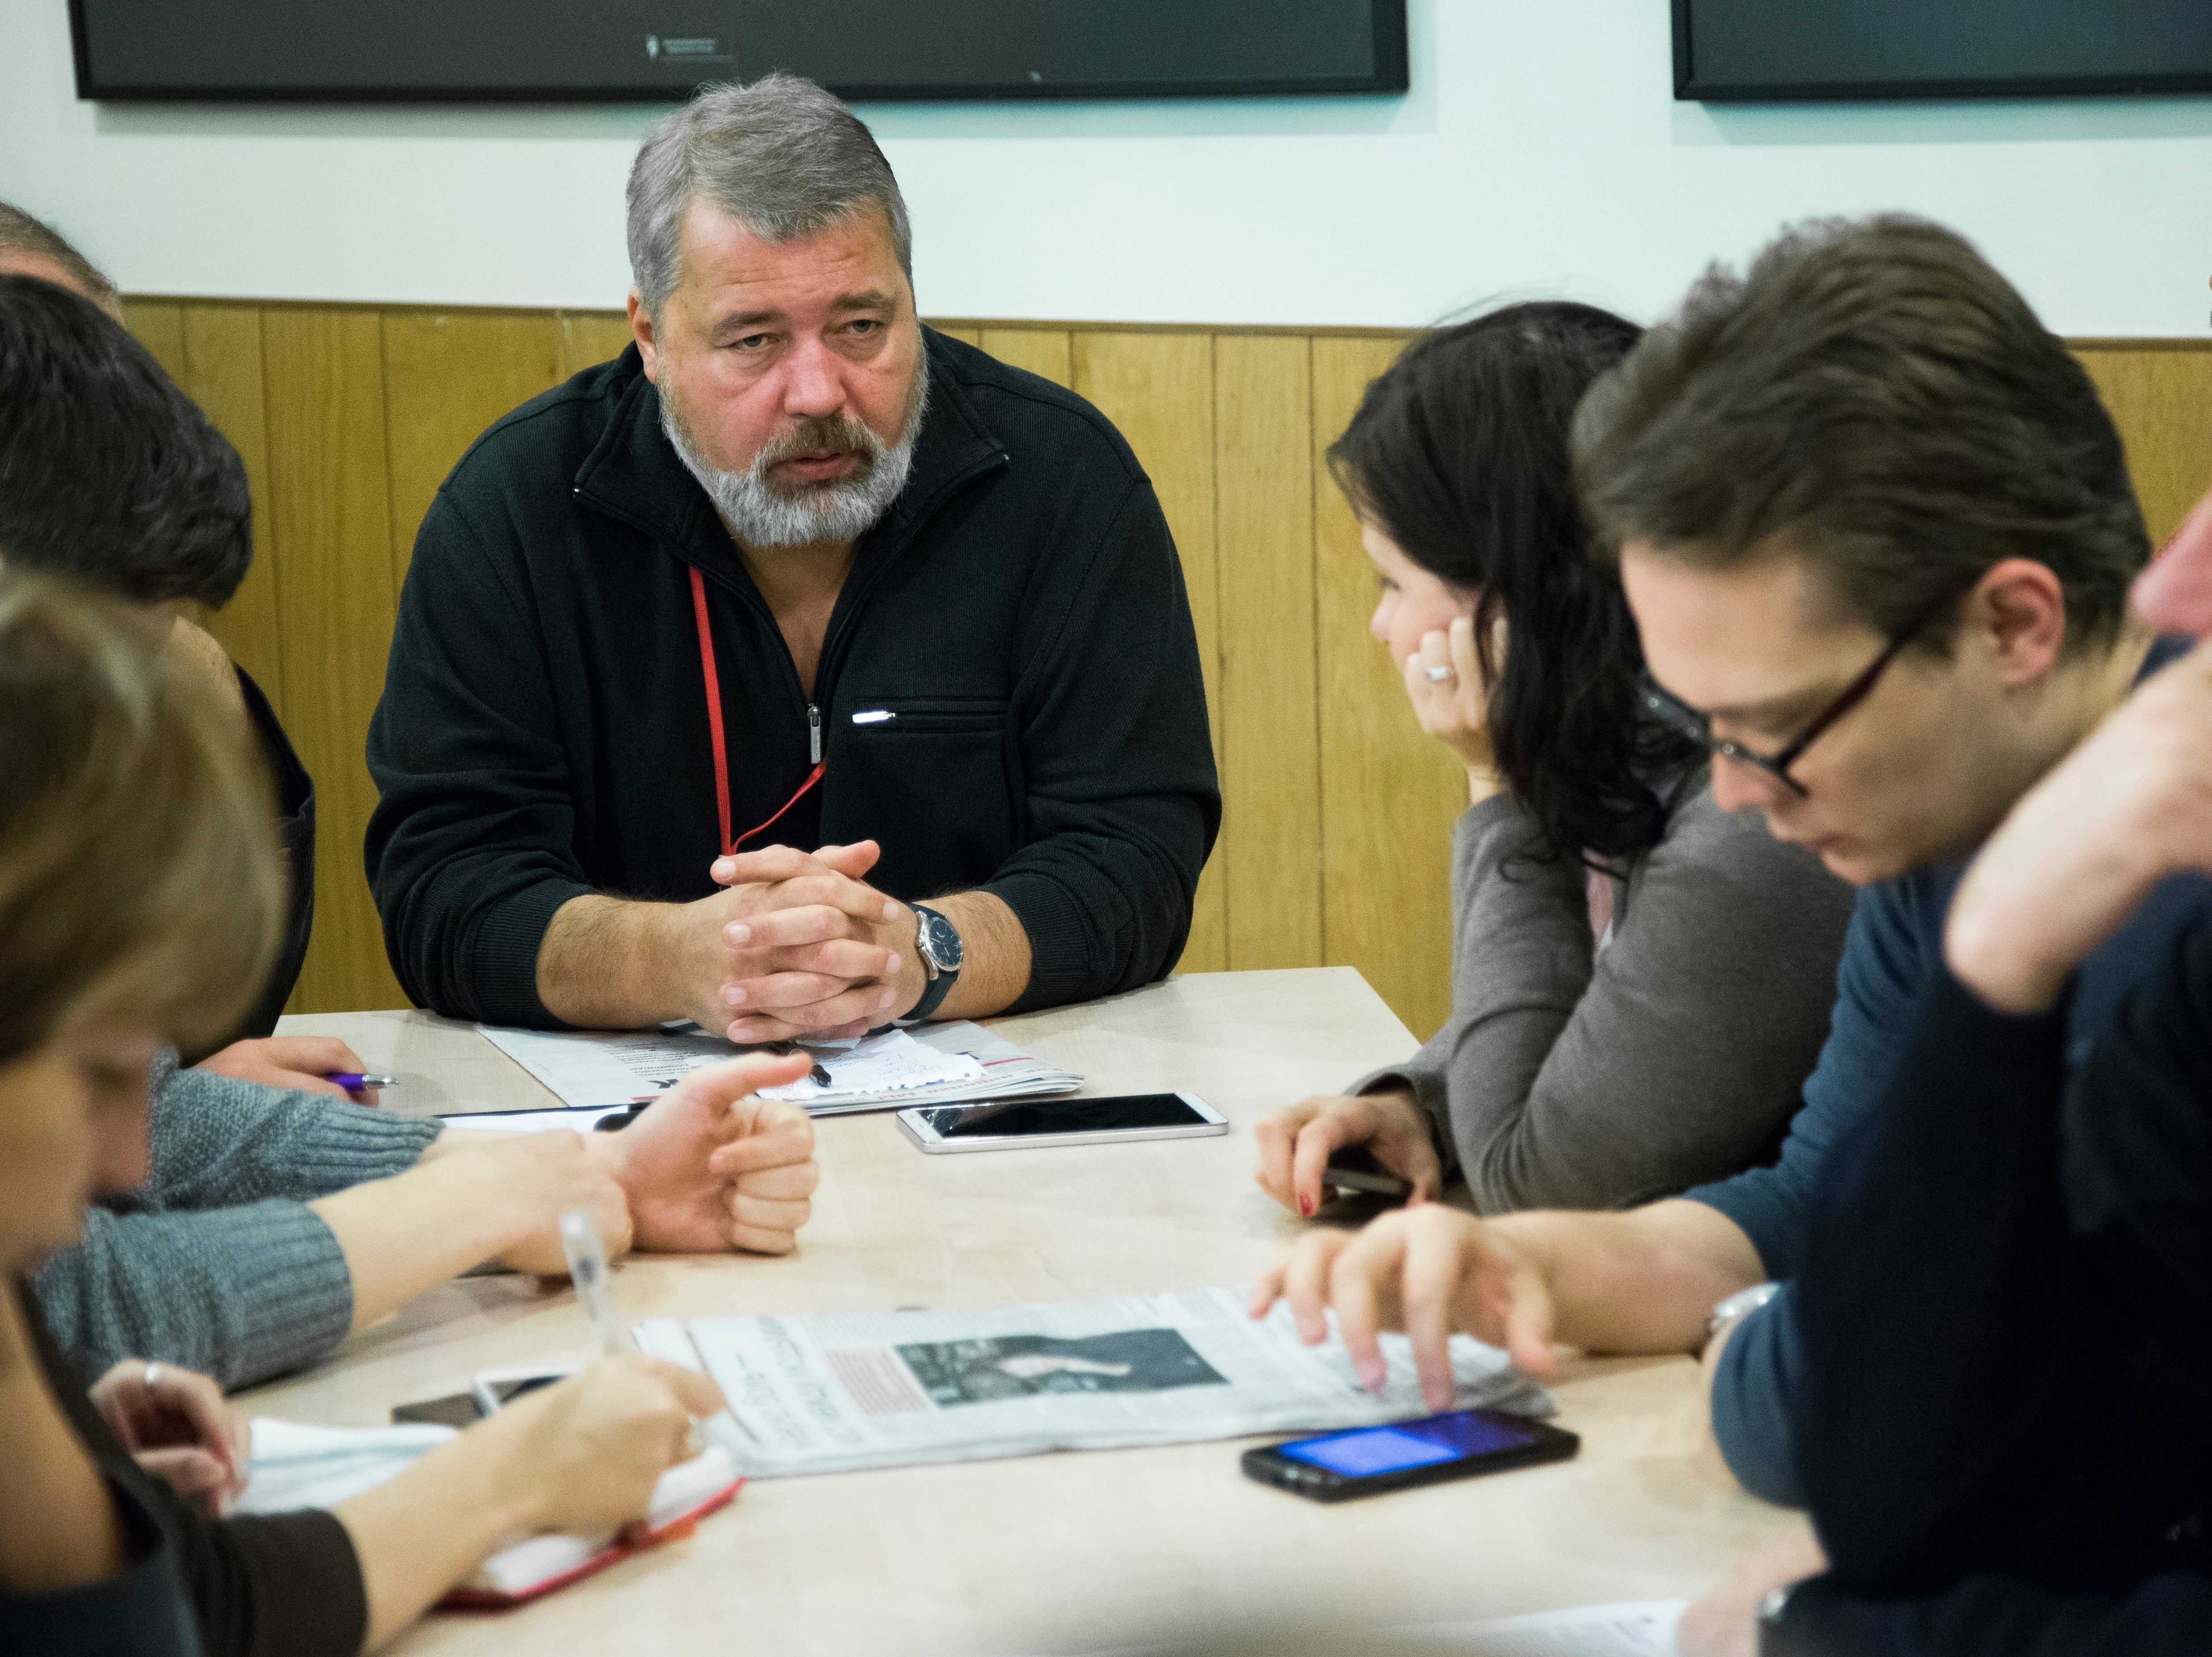 Dmitry Muratov, editor of Novaya Gazeta, attends a planning meeting with the editorial board in Moscow, Russia